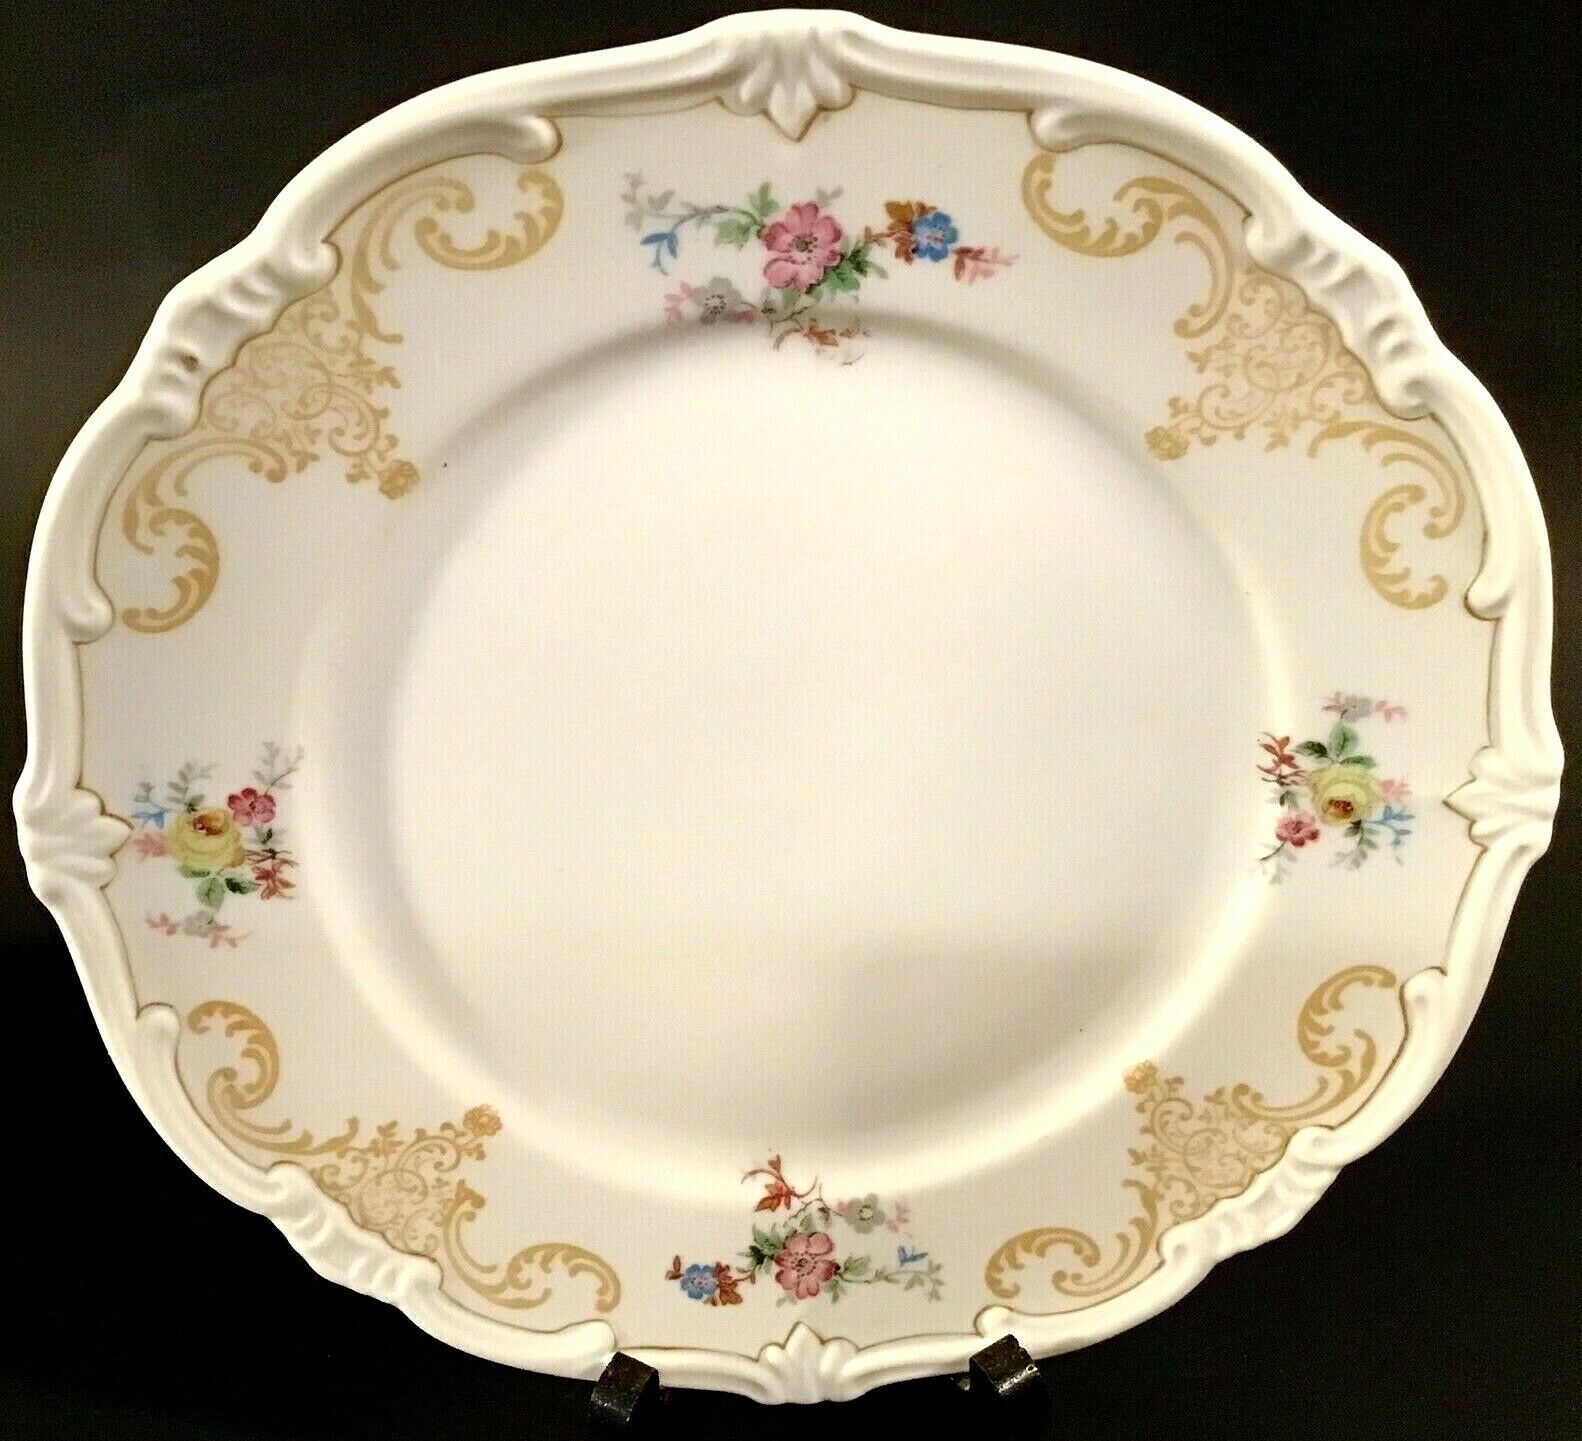 WEIMAR LUNCHEON PLATE HAND DECORATED 02003 PATTERN FLORAL SCALLOPED ANTIQUE